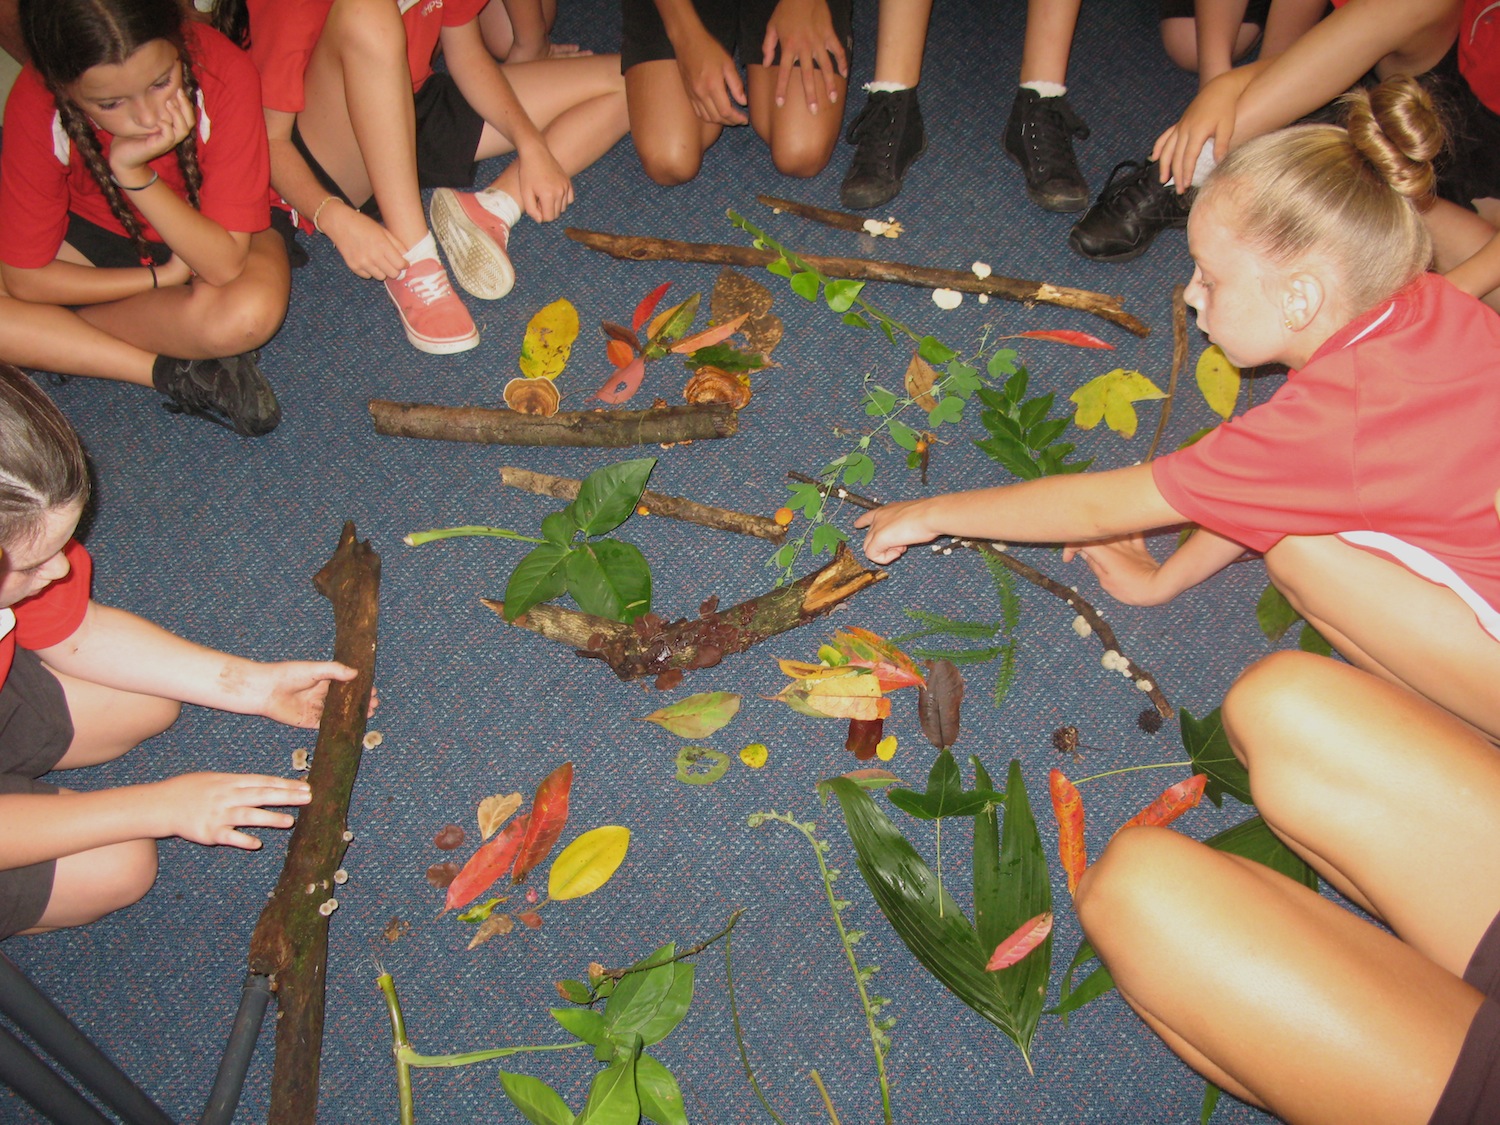 Nambucca Heads Public School investigating forest textures. Photo: Bryony Anderson.